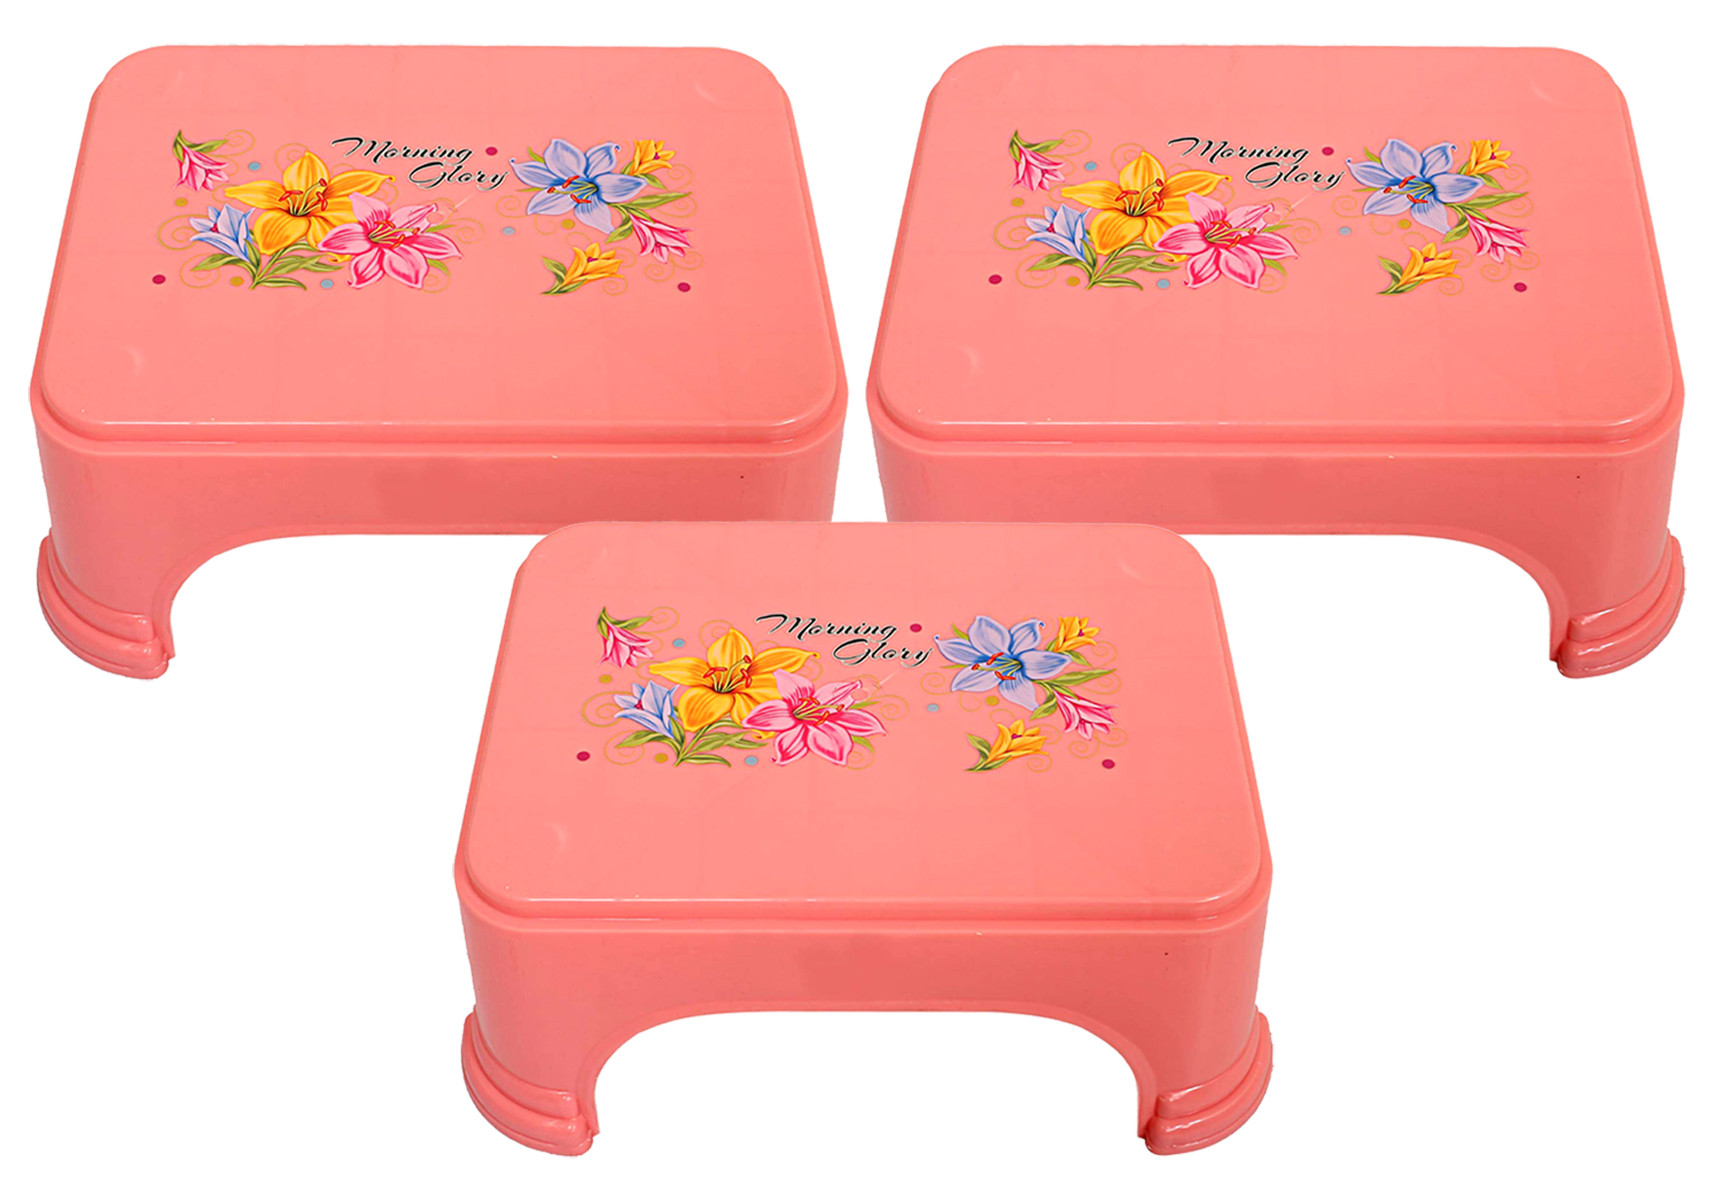 Kuber Industries Floral Print Plastic Bathroom Stool, Adults Simple Style Stool Anti-Slip with Strong Bearing Stool for Home, Office, Kindergarten, Pink